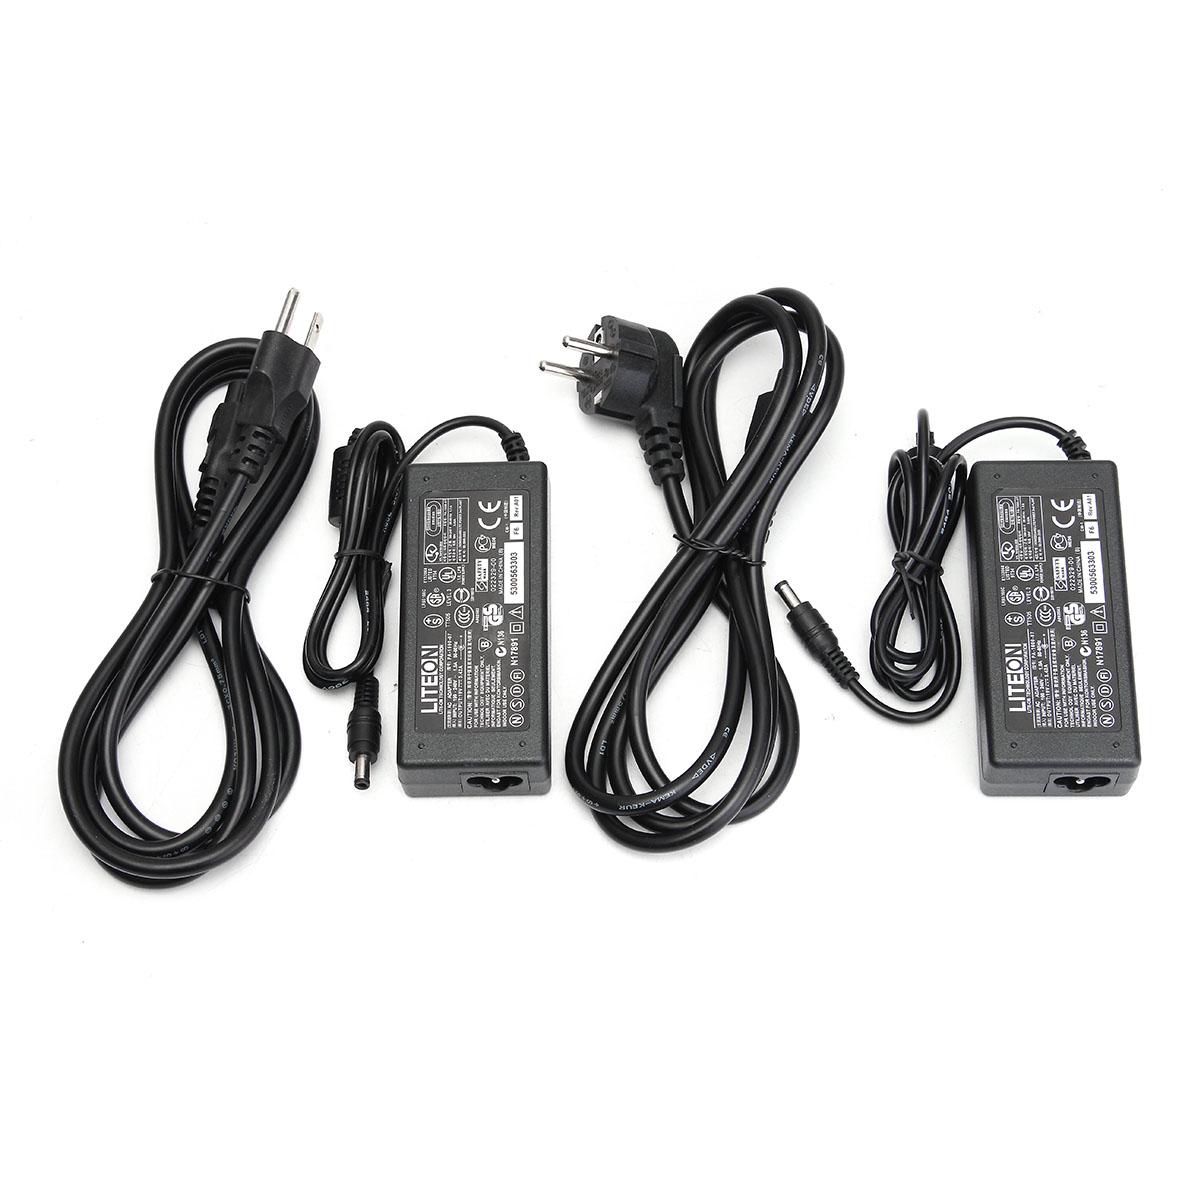 DC-19V-342A--Power-Adapter-Universal-Power-Supply-Charger-USEU-Plug-1363367-3